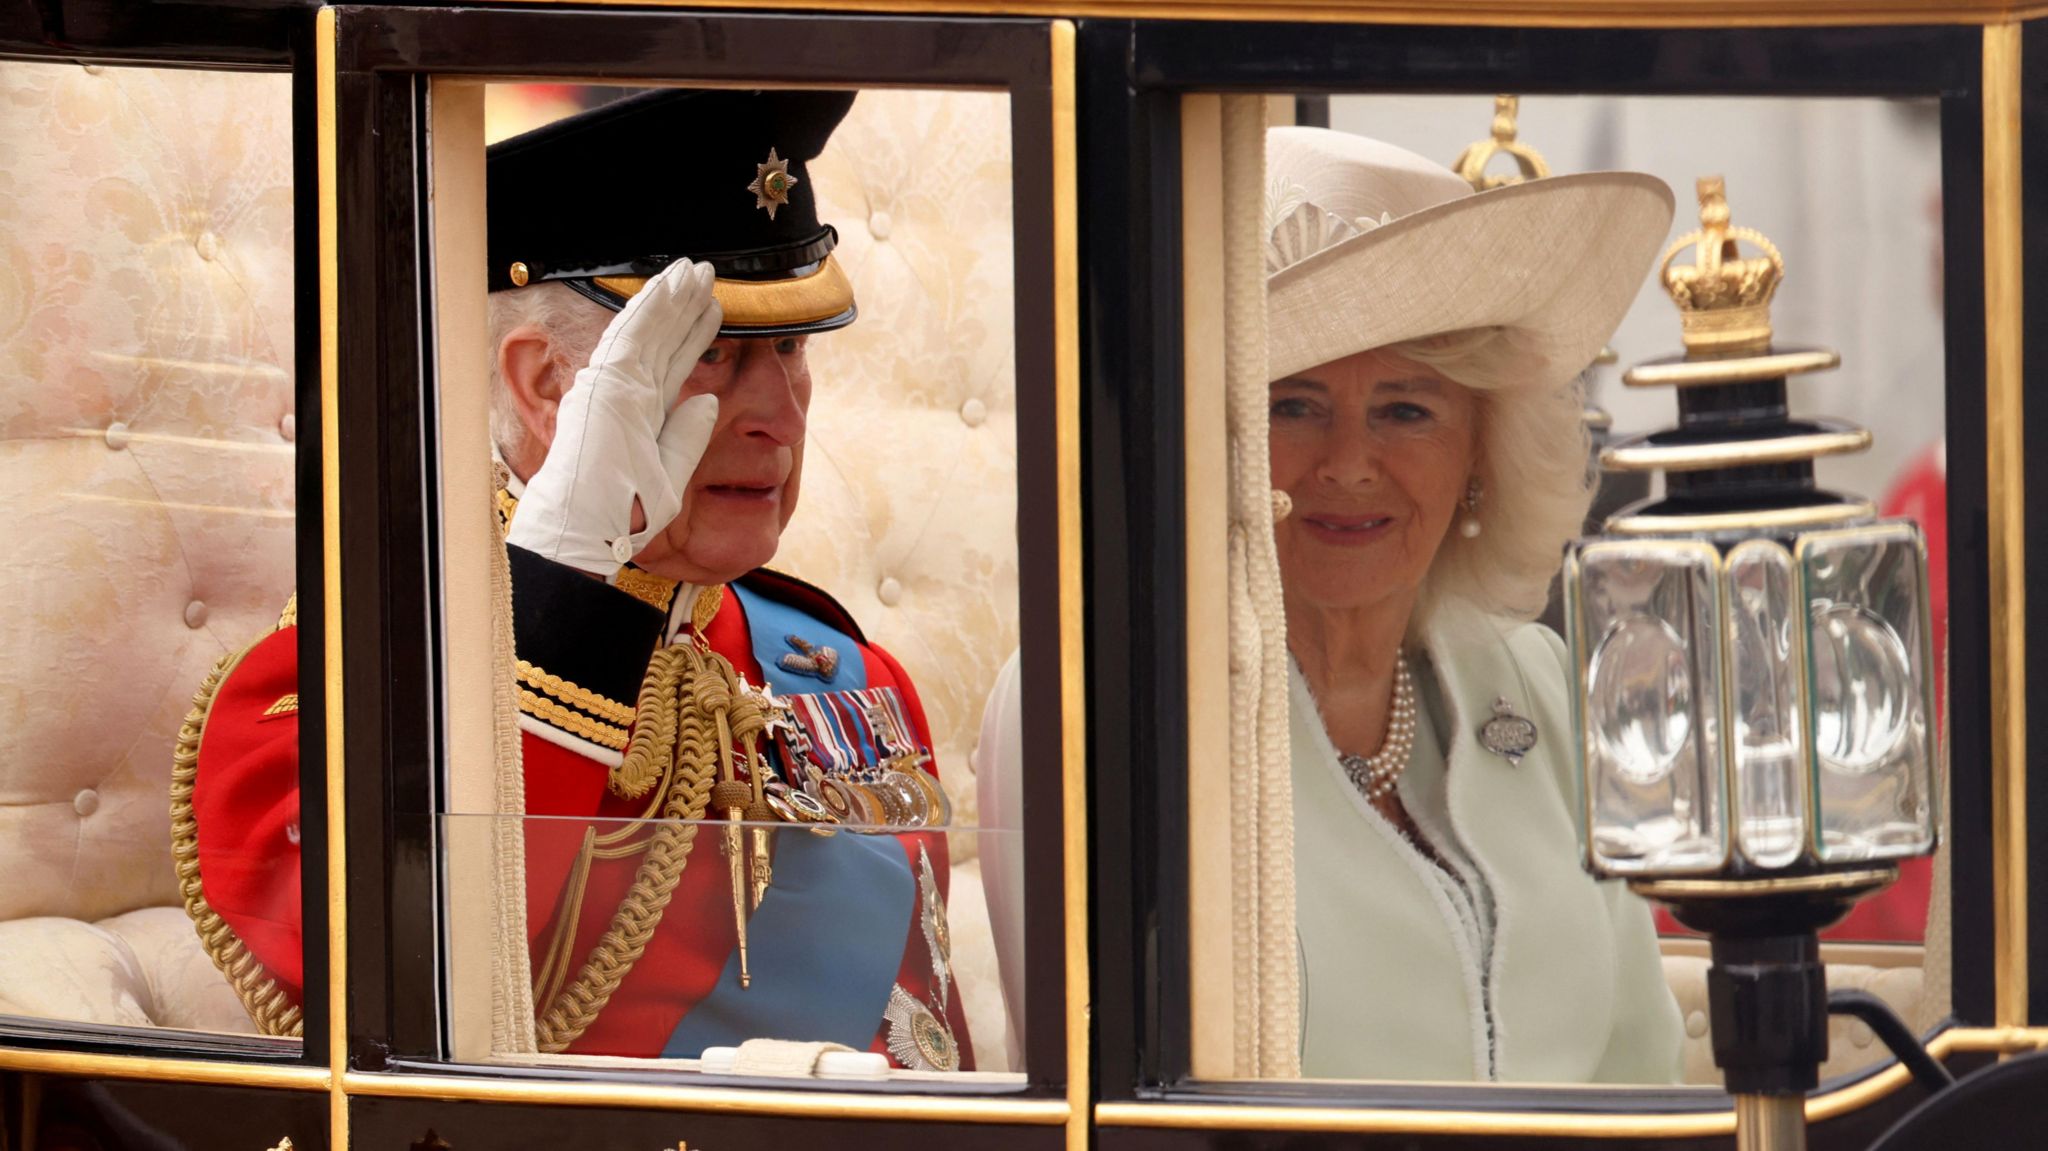 The King salutes from inside his carriage while sitting next to the Queen